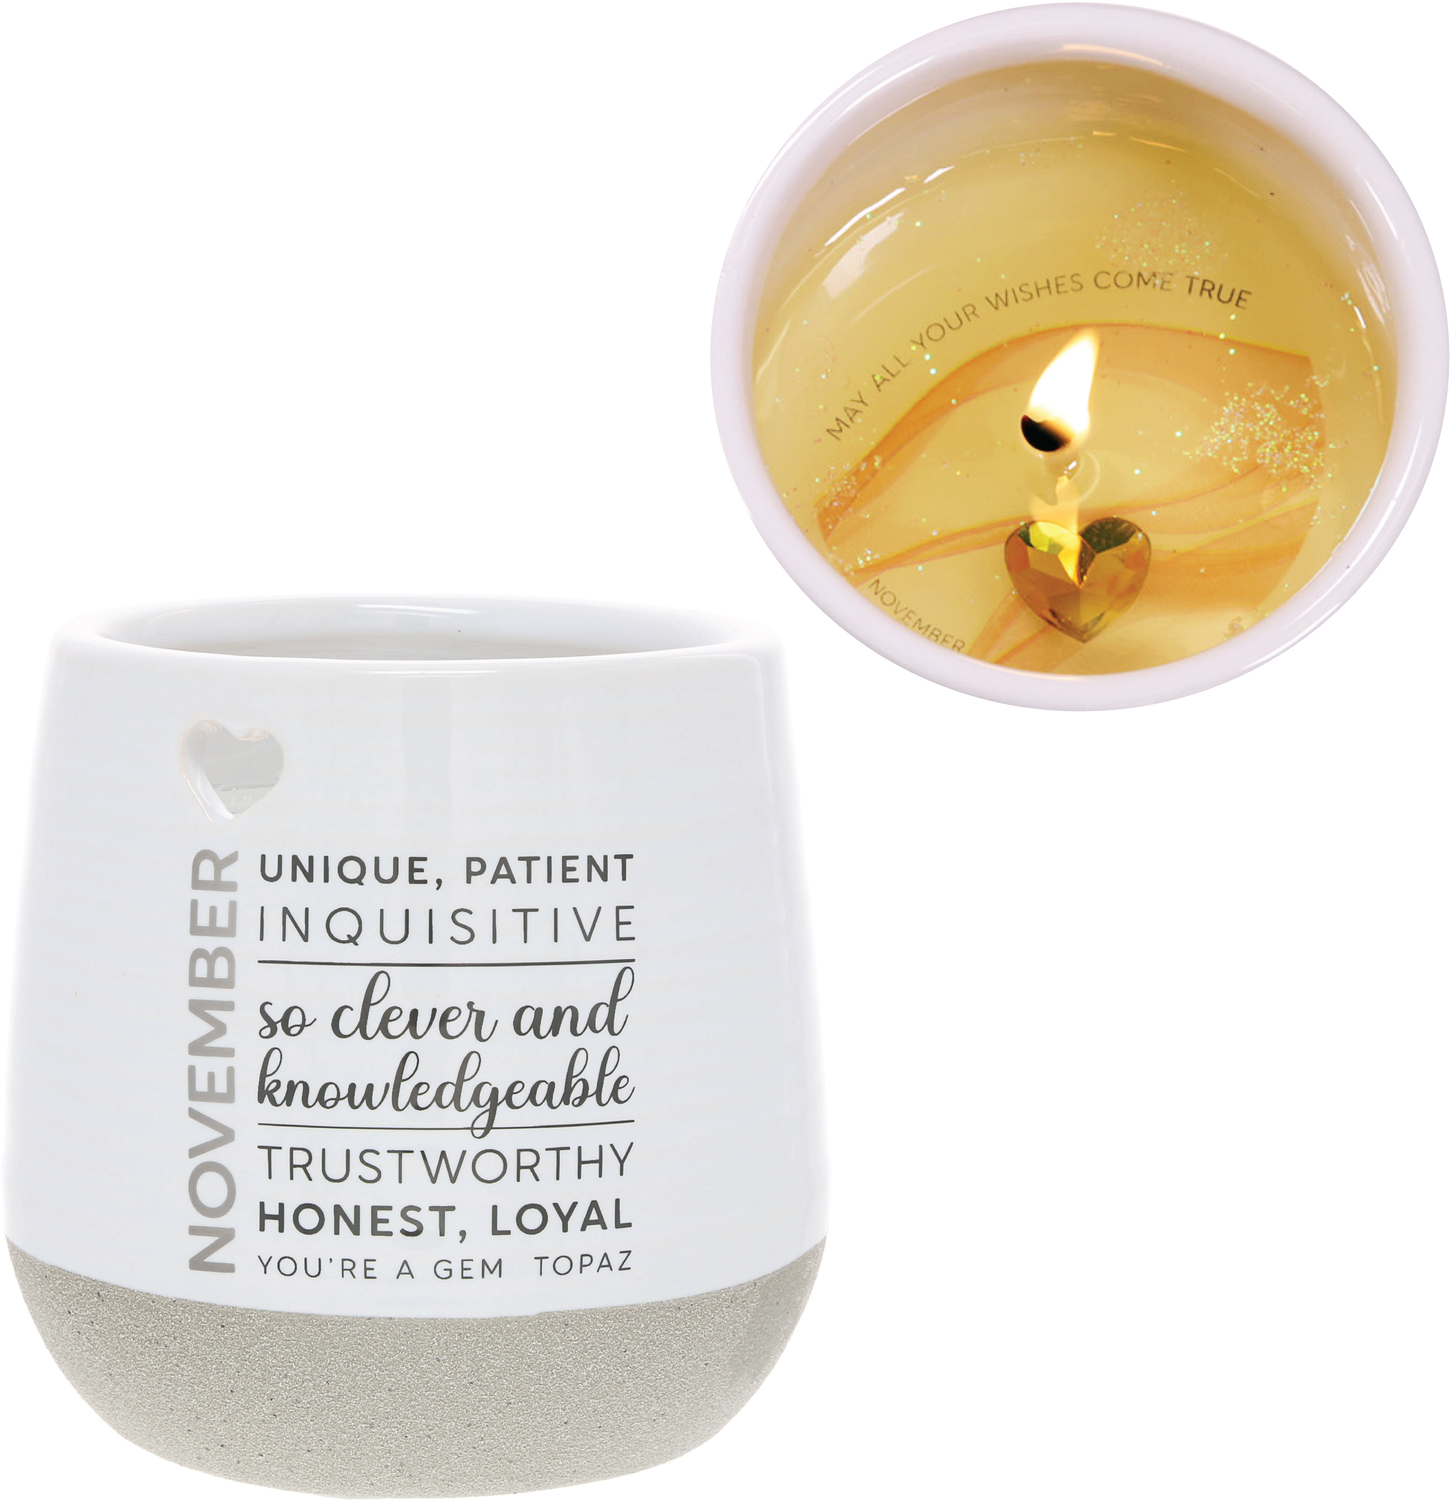 November by You Are a Gem - November - 11 oz - 100% Soy Wax Reveal Candle with Birthstone Scent: Tranquility